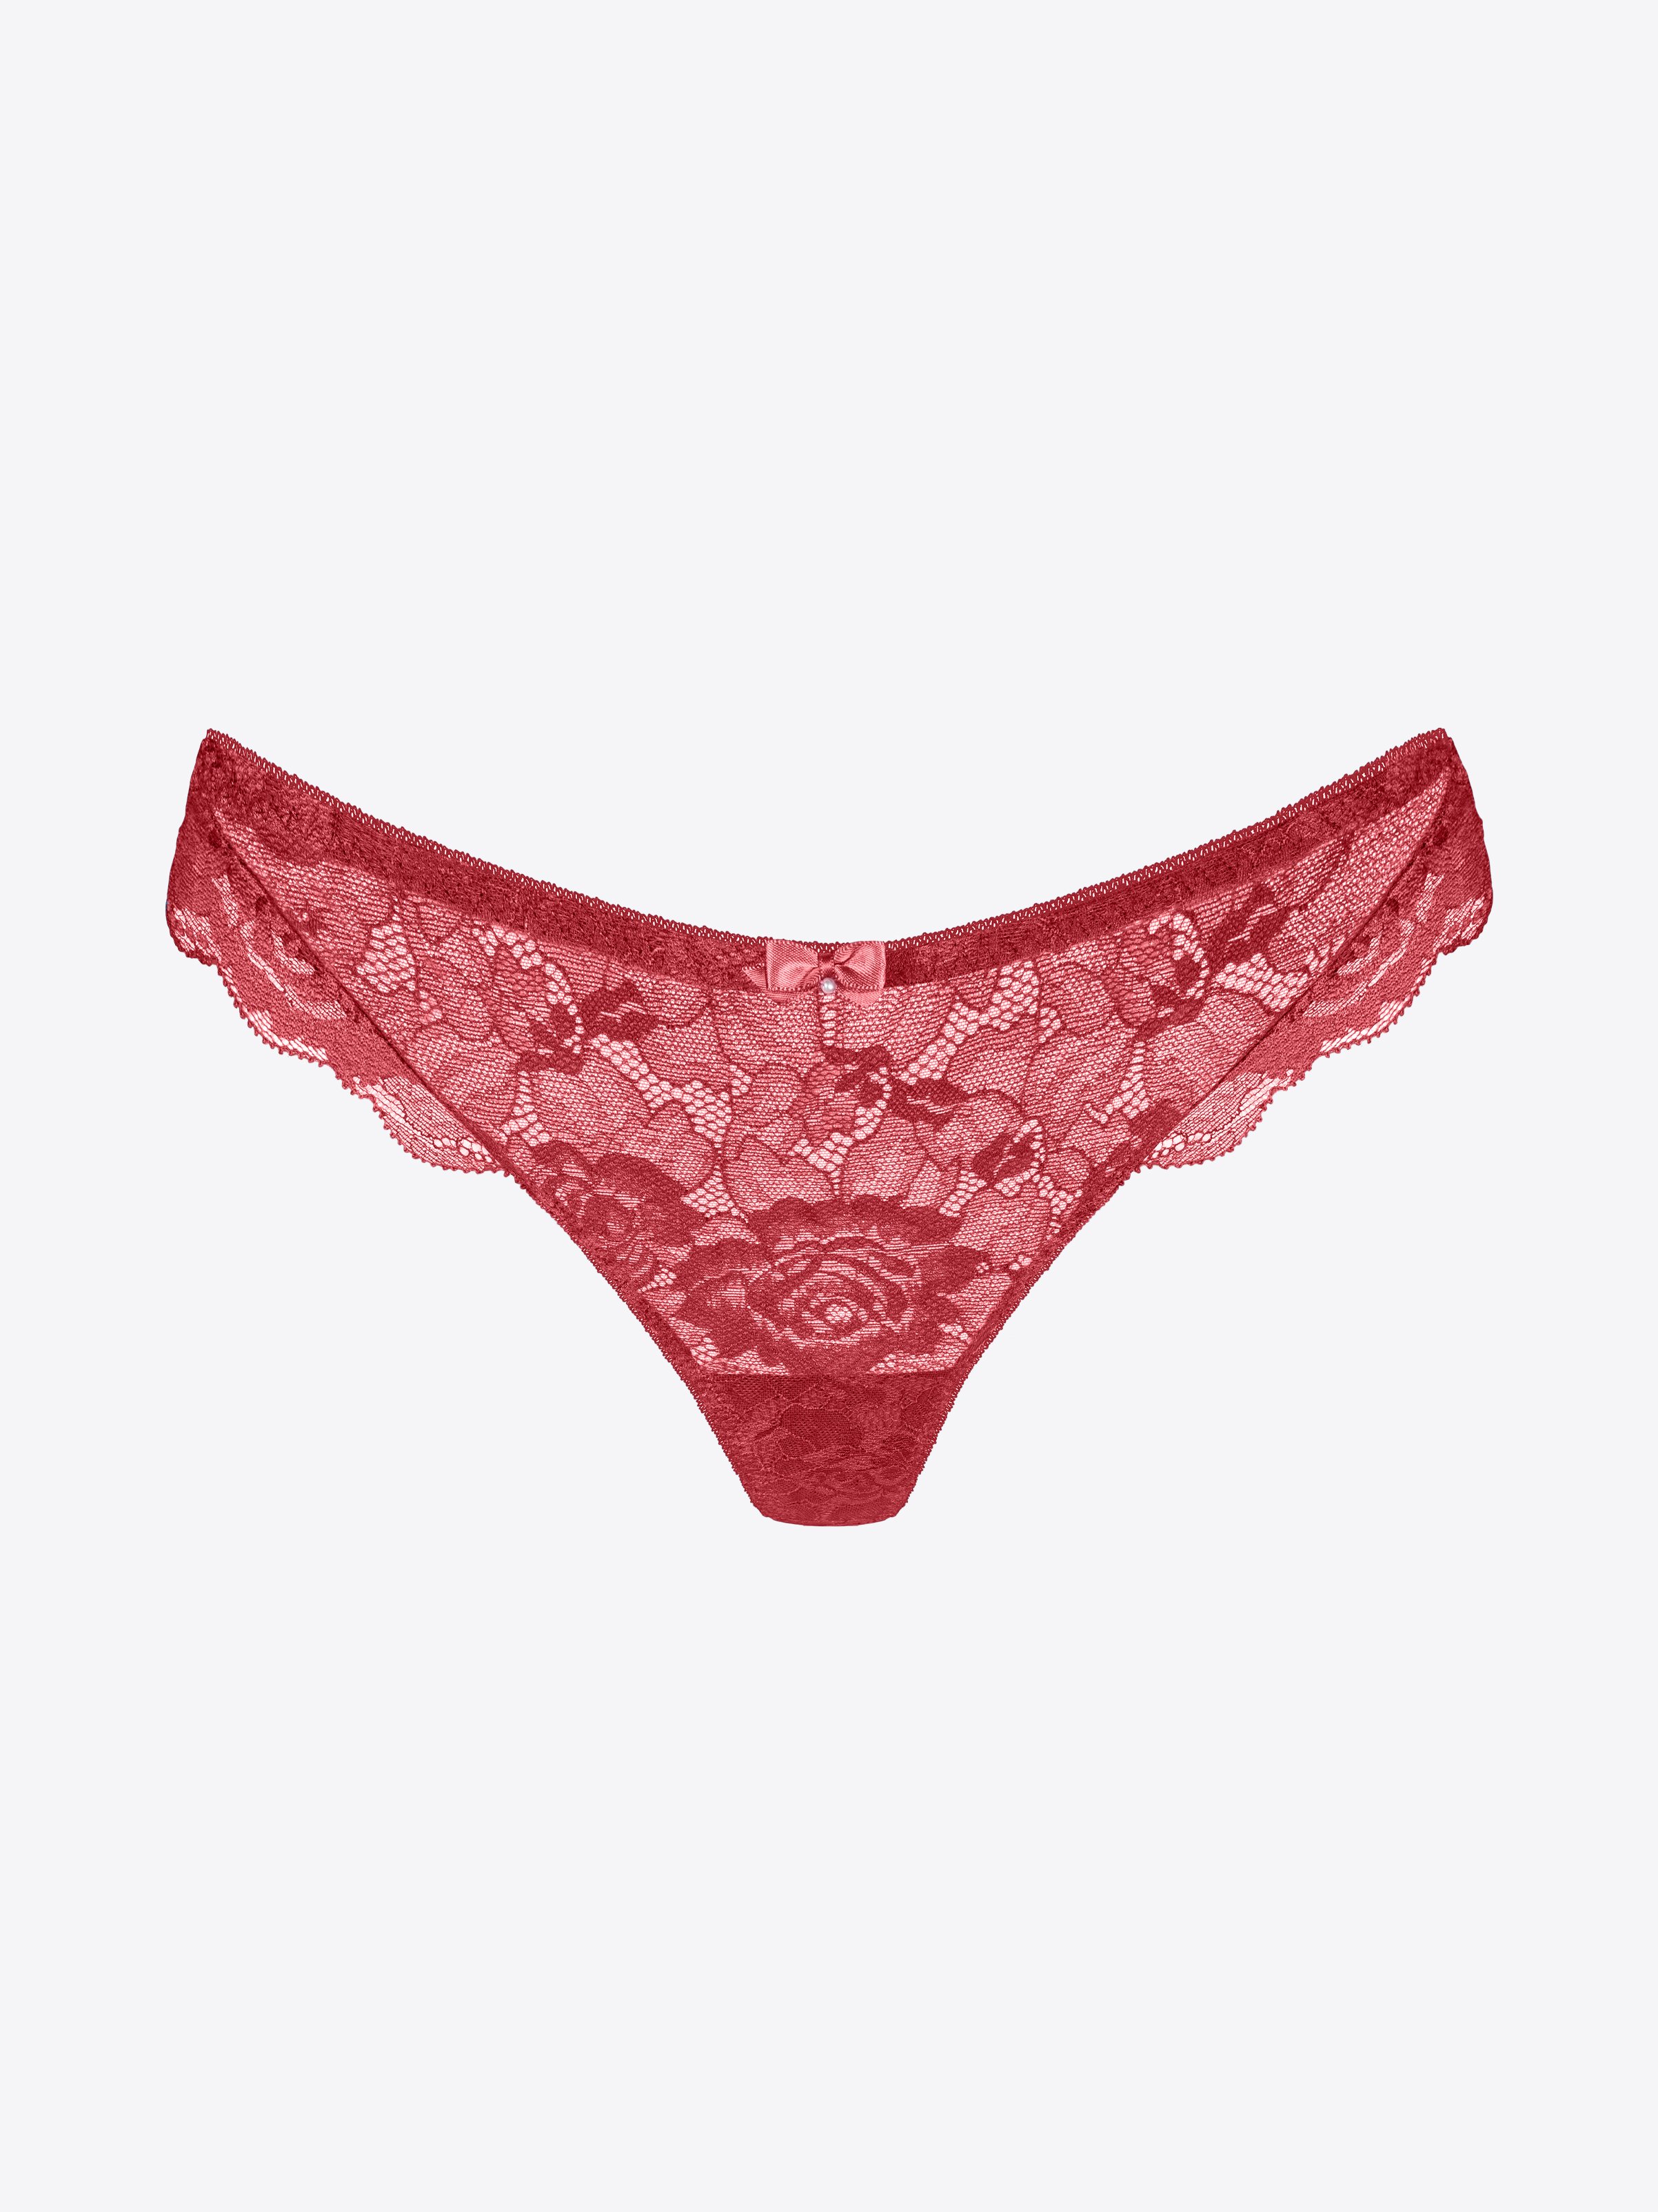 File:Visible red thong.jpg - Wikimedia Commons